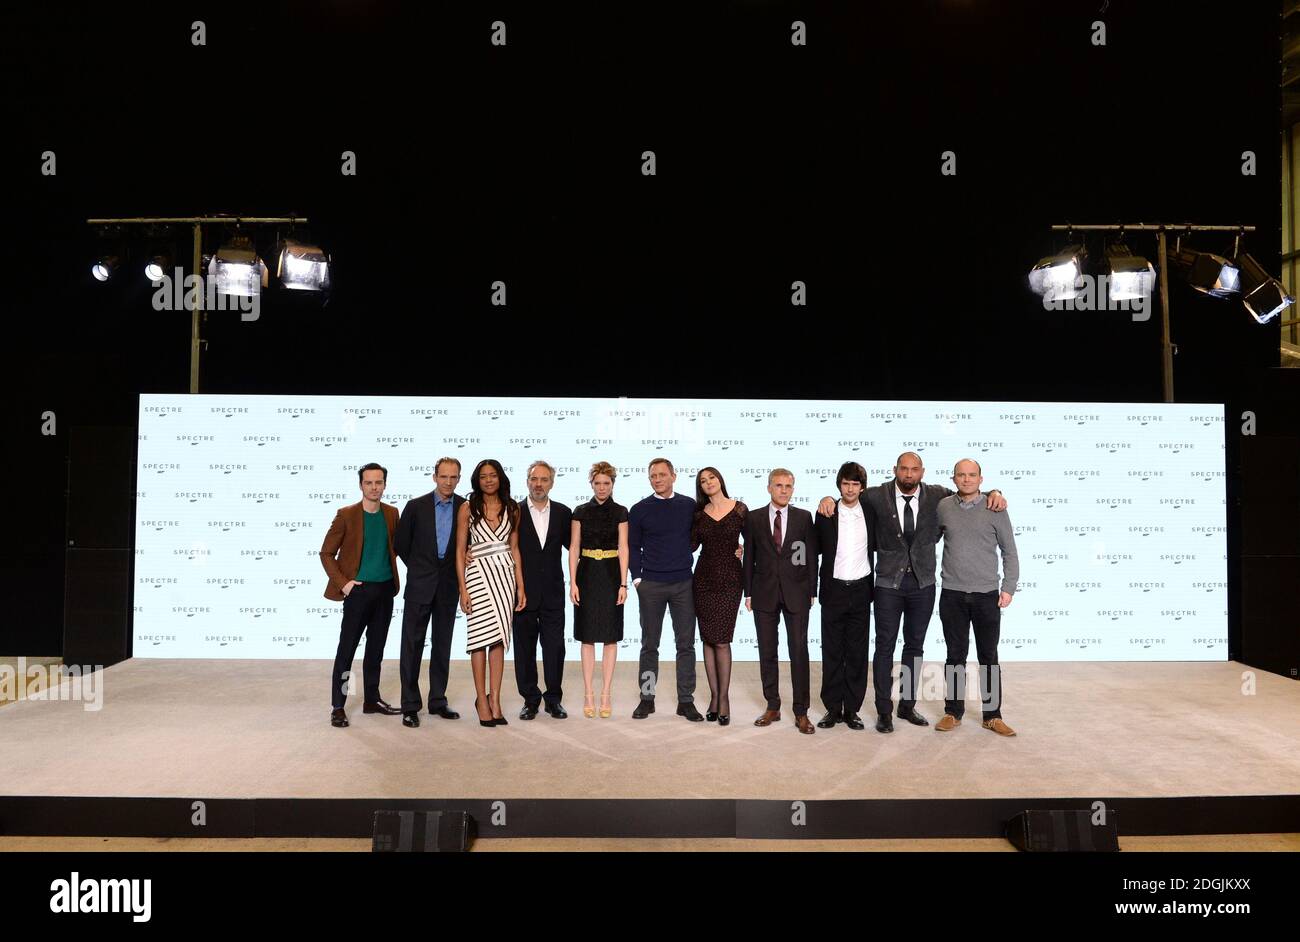 (L-R) Andrew Scott, Ralph Fiennes, Naomie Harris, Sam Mendes, Lea Seydoux, Daniel Craig, Monica Bellucci, Christoph Waltz, Ben Whishaw, Dave Bautista and Rory Kinnear attend the BOND 24 live announcement to mark the start of production on the 24th Bond film held at Pinewood Studios, London The title and cast of the 24th Bond film were revealed, marking the start of principal photography on Monday 8th December Stock Photo